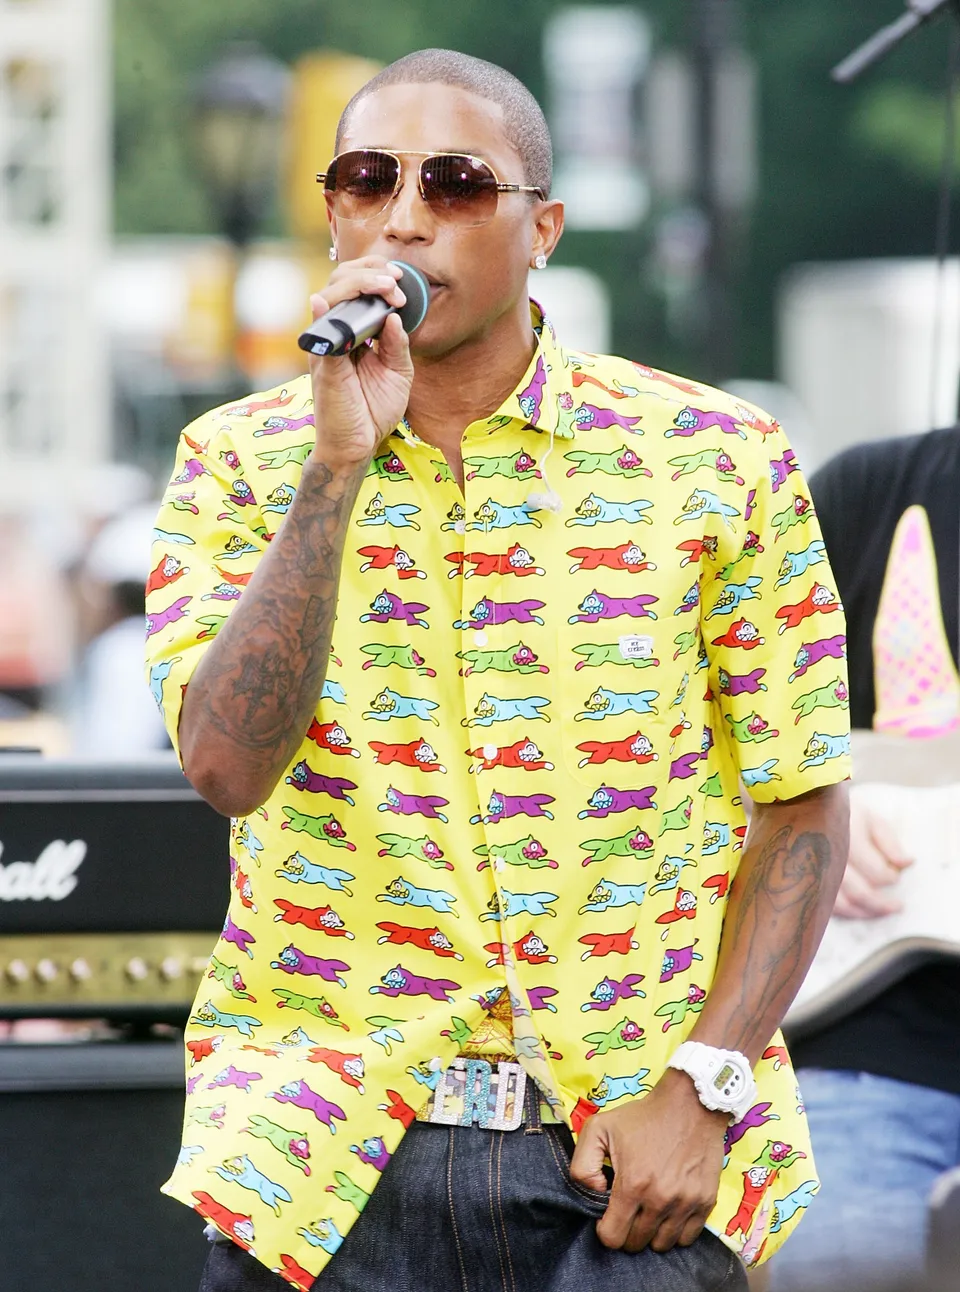 Fashion Is a Way”—How Pharrell Williams' Philosophy Could Make Him